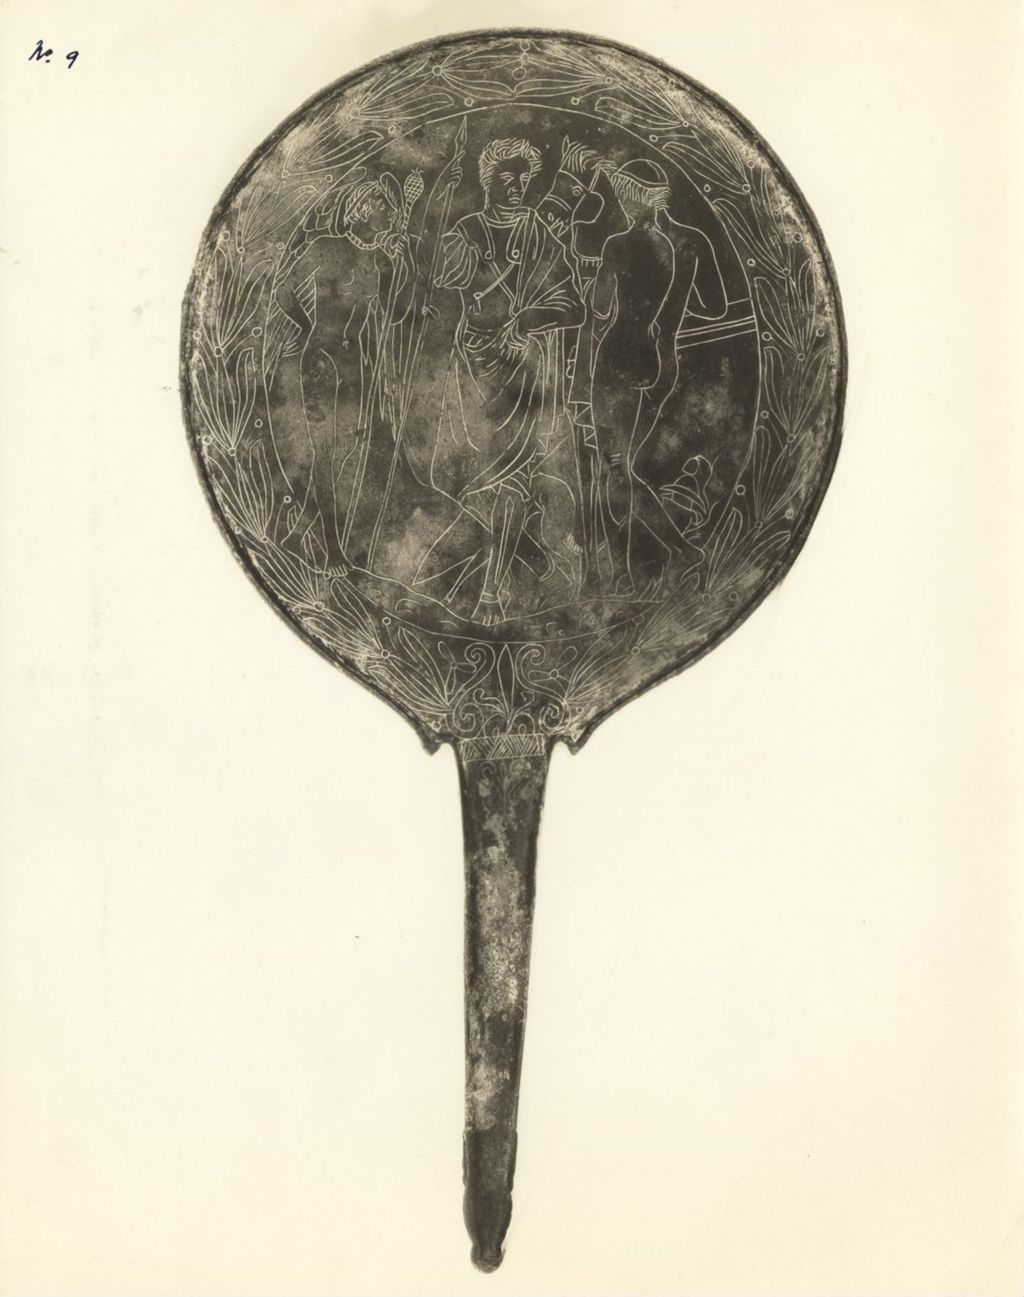 Miniature of Etruscan bronze mirror depicting Castor, one of the Heavenly twins